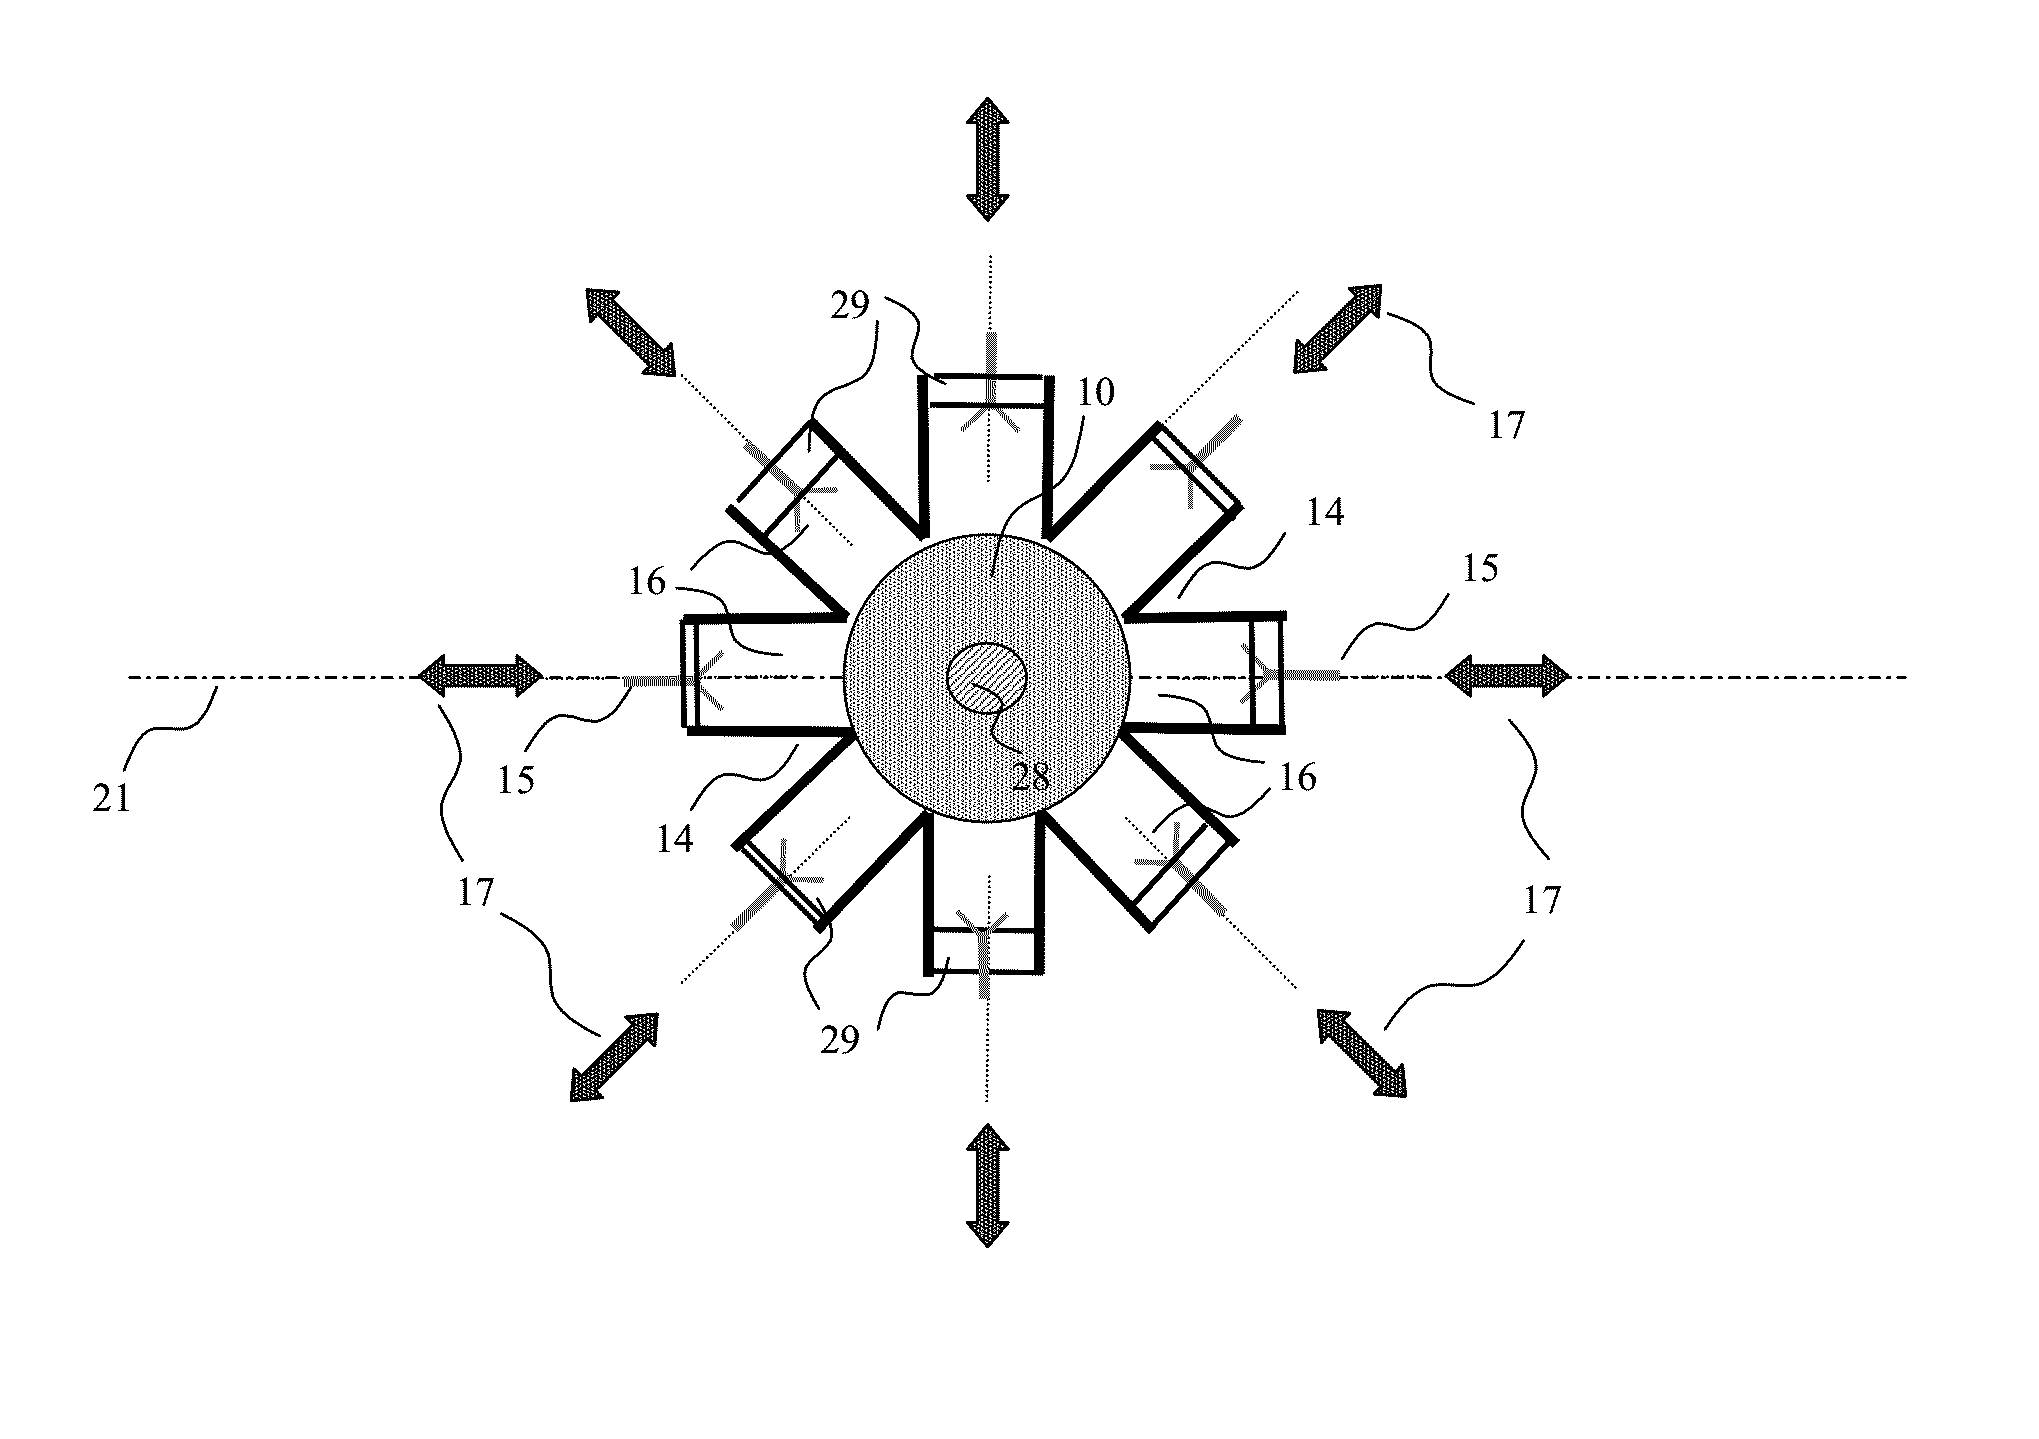 Radial power amplification device with phase dispersion compensation of the amplification paths